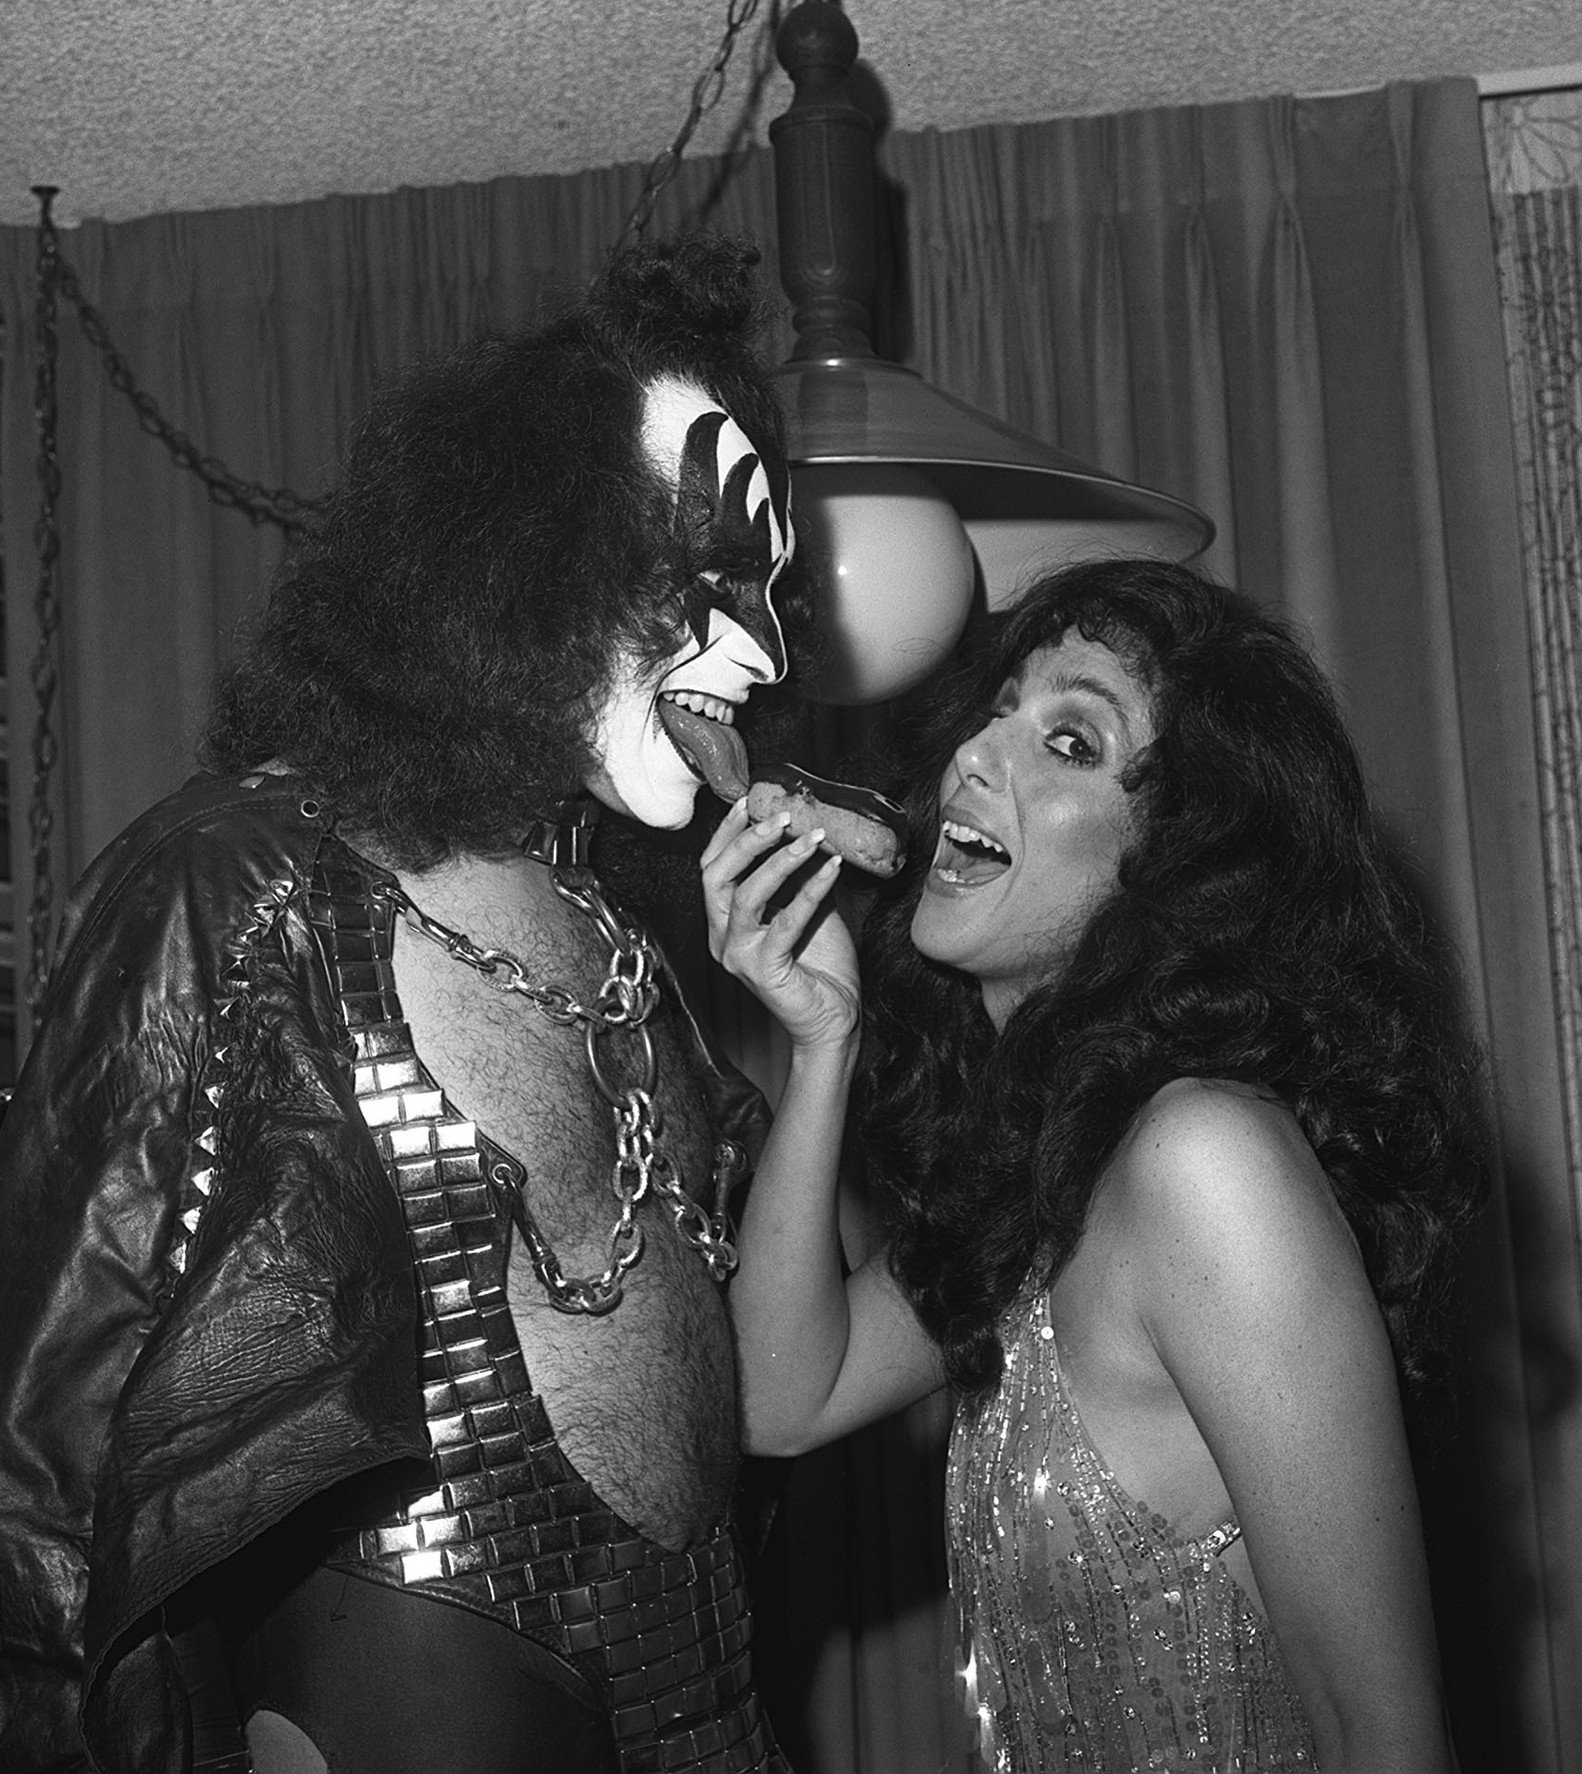 Photos of Cher and Gene Simmons During Their Short Dating in 1979